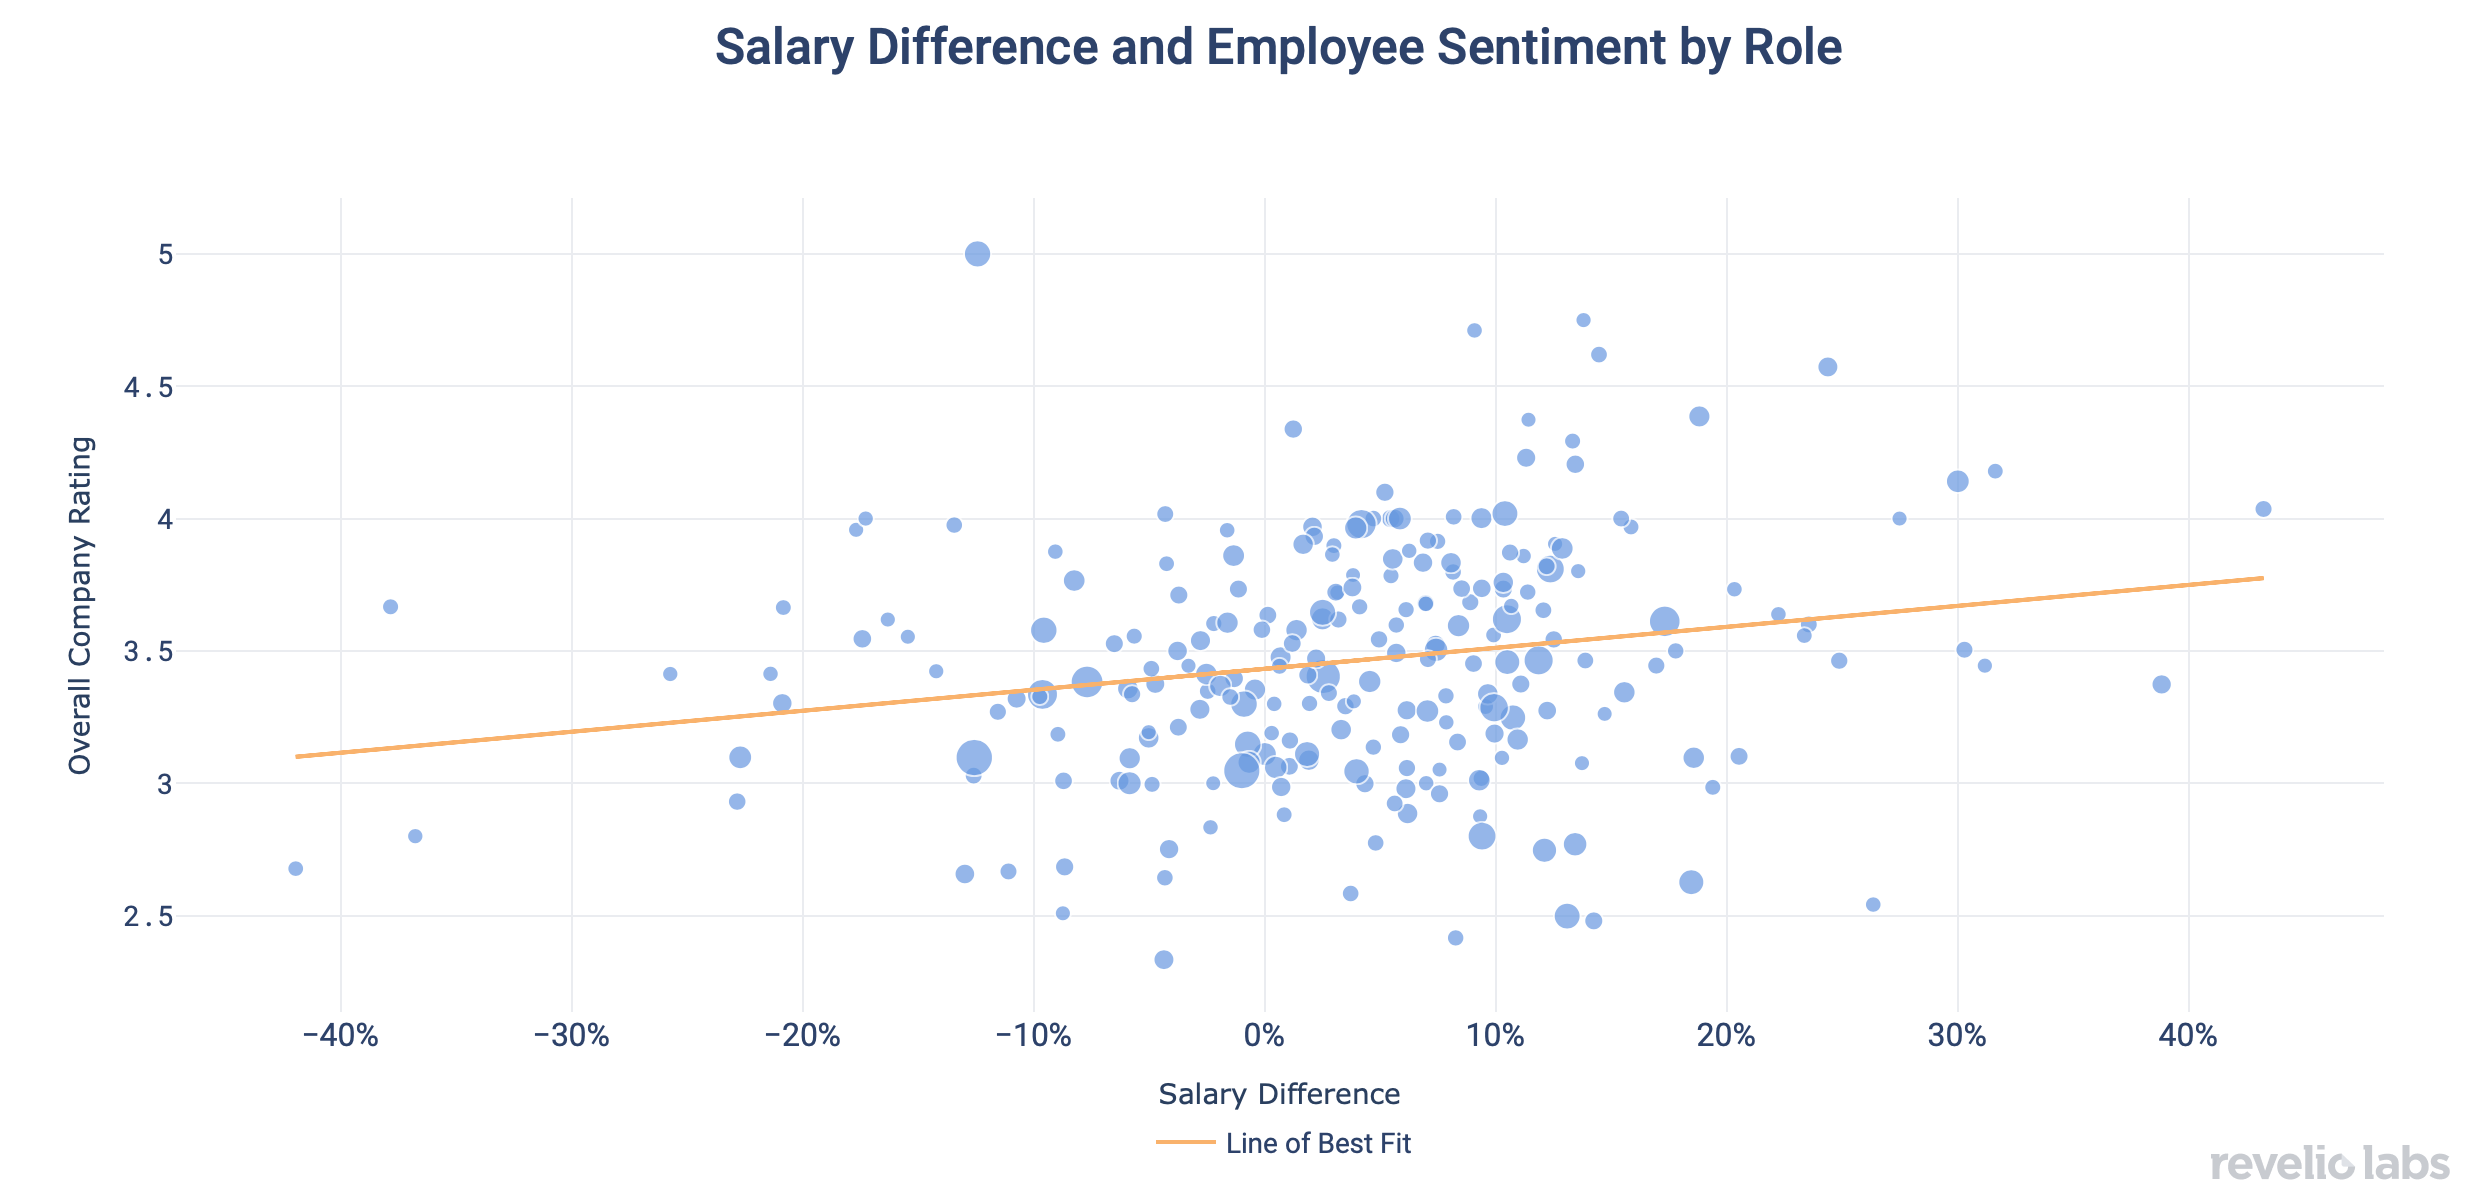 Salary Difference and Employee Sentiment by Role